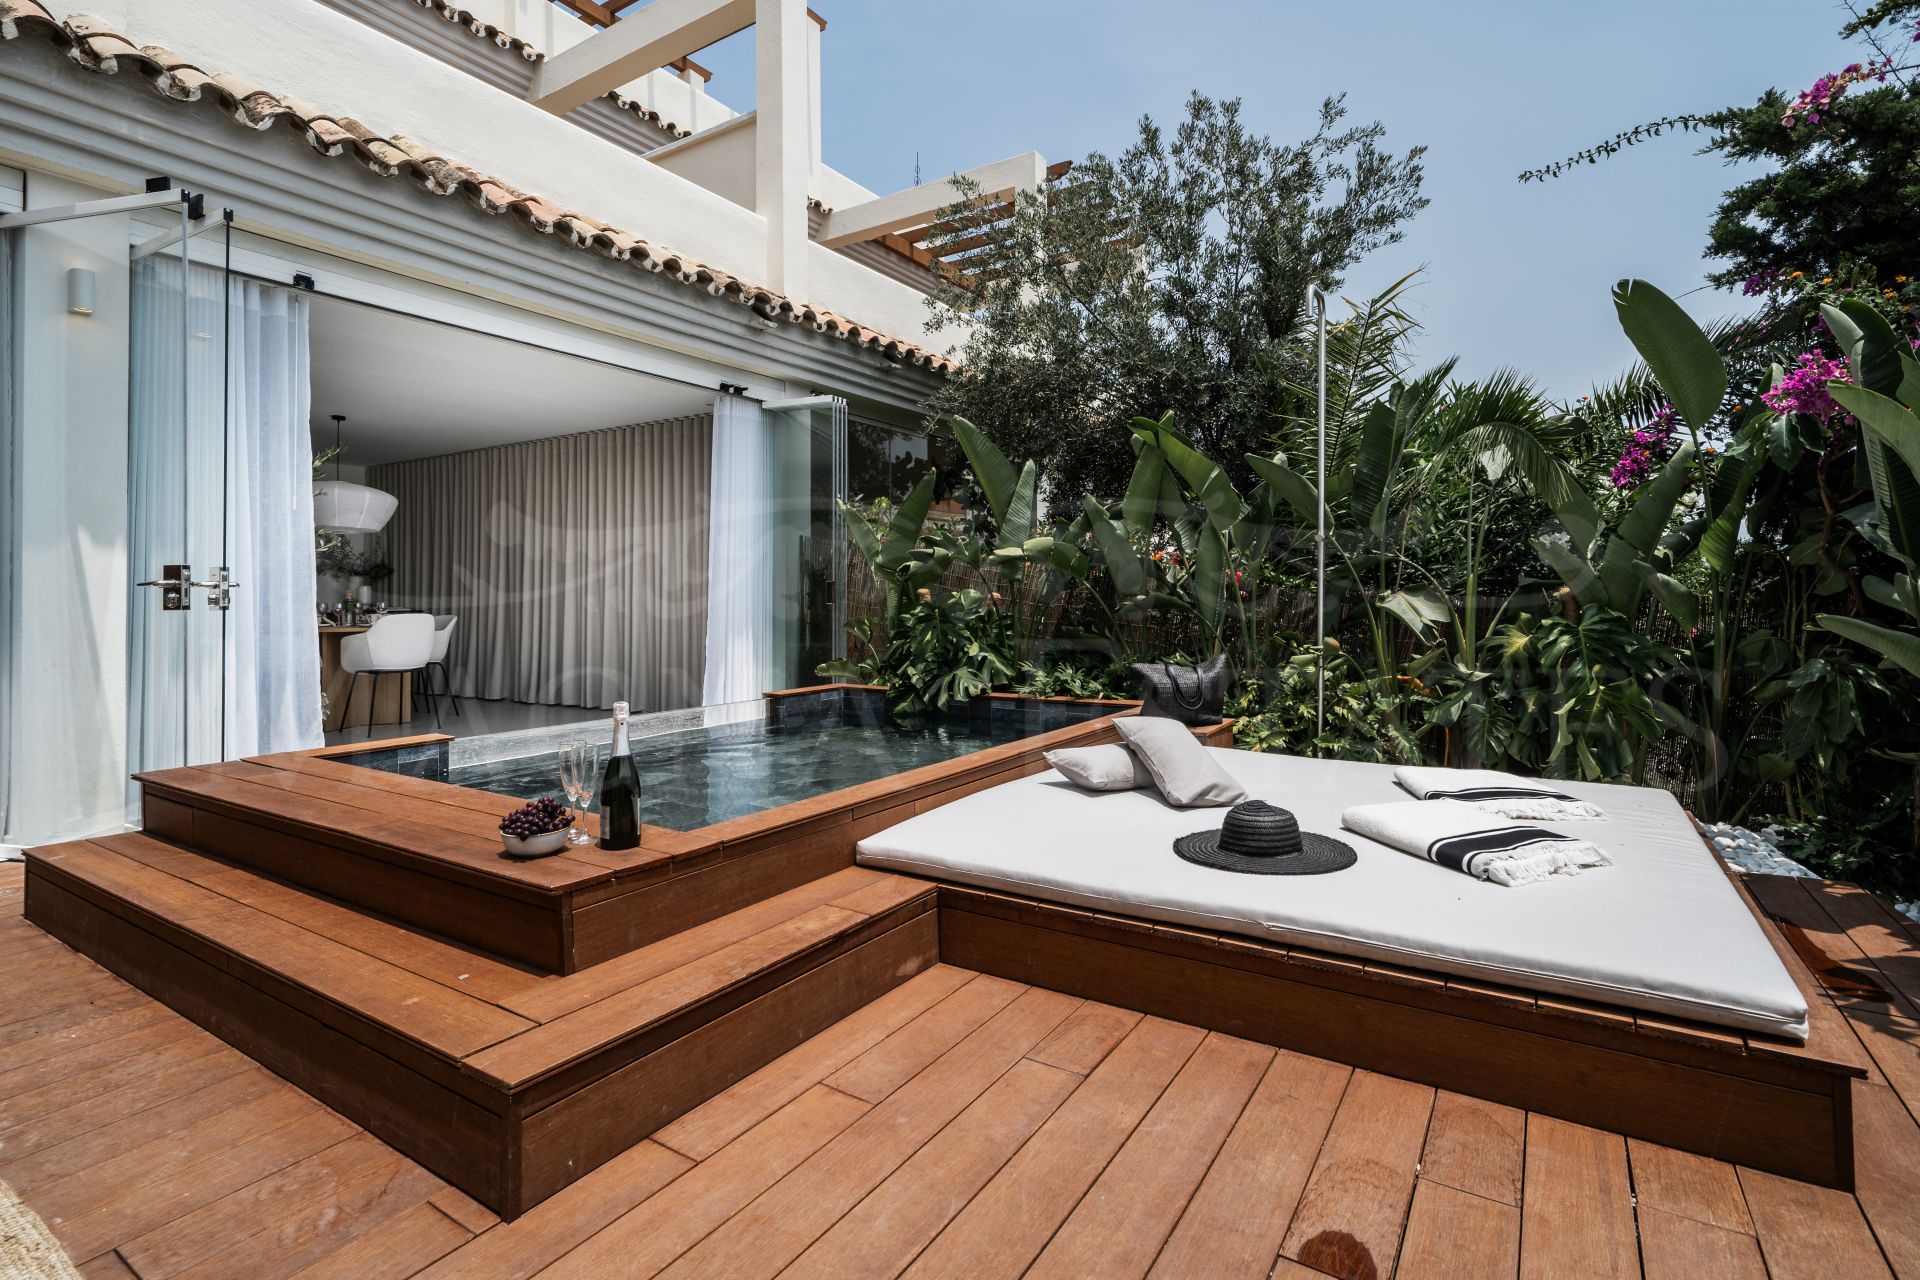 Completely renovated 3 bedroom apartment in Nueva Andalucia, Marbella